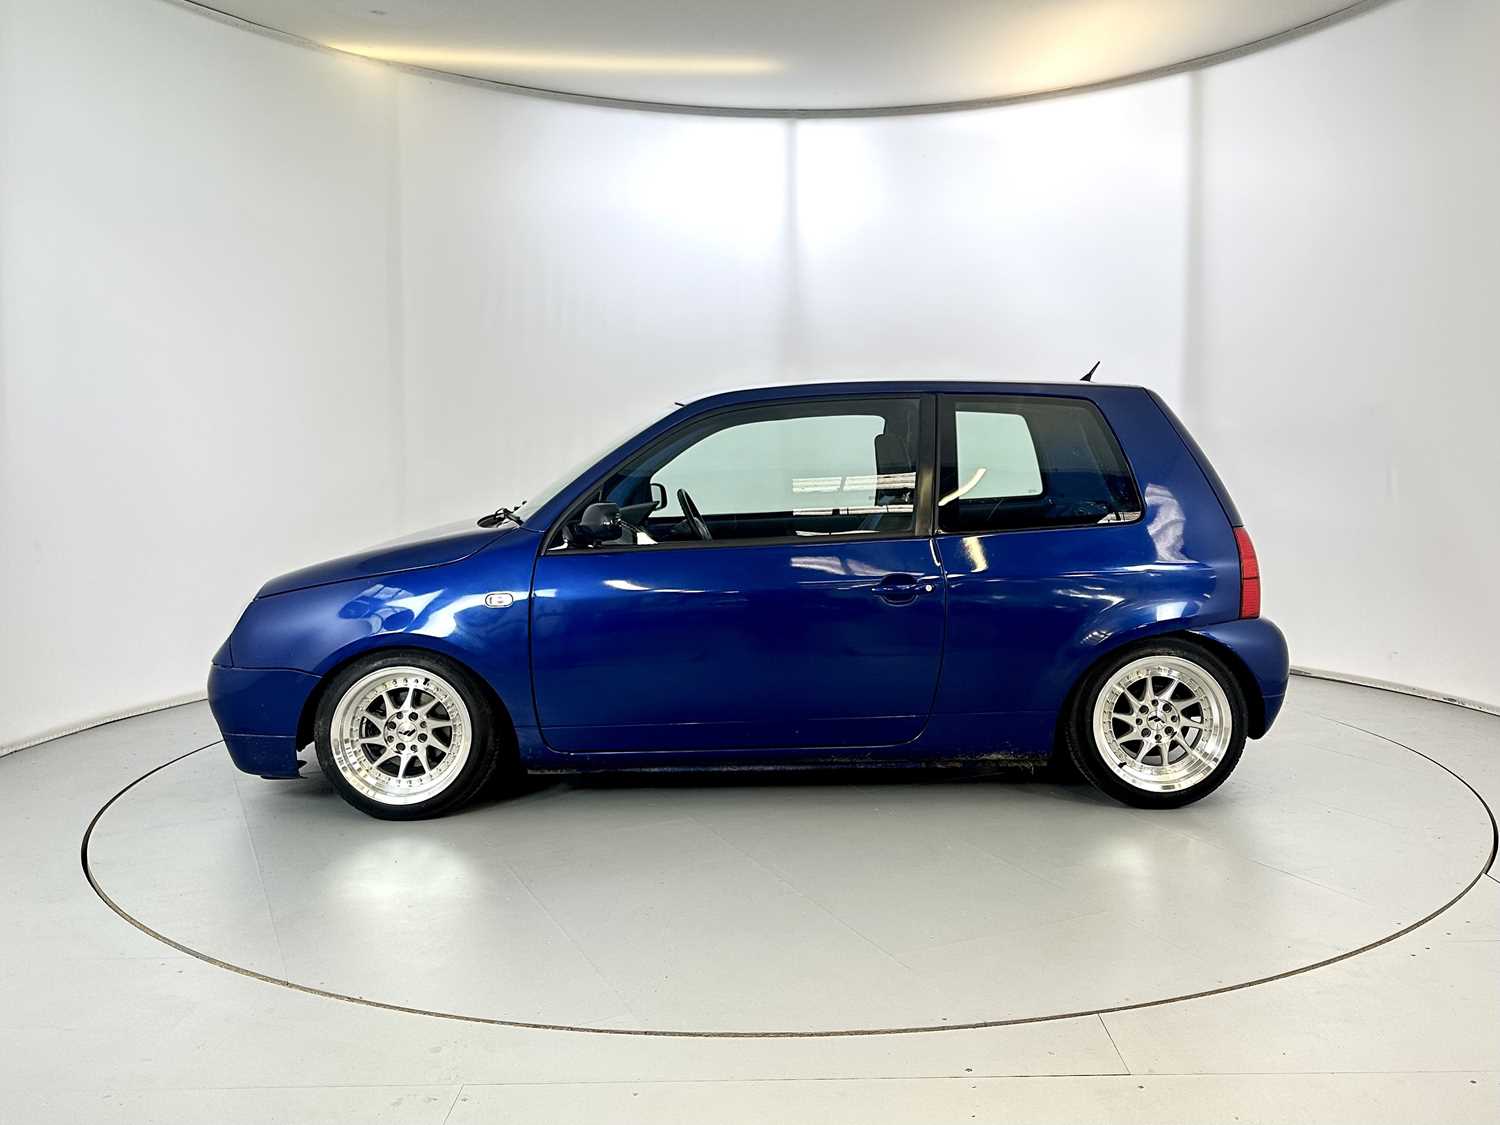 2002 Volkswagen Lupo - Image 5 of 28